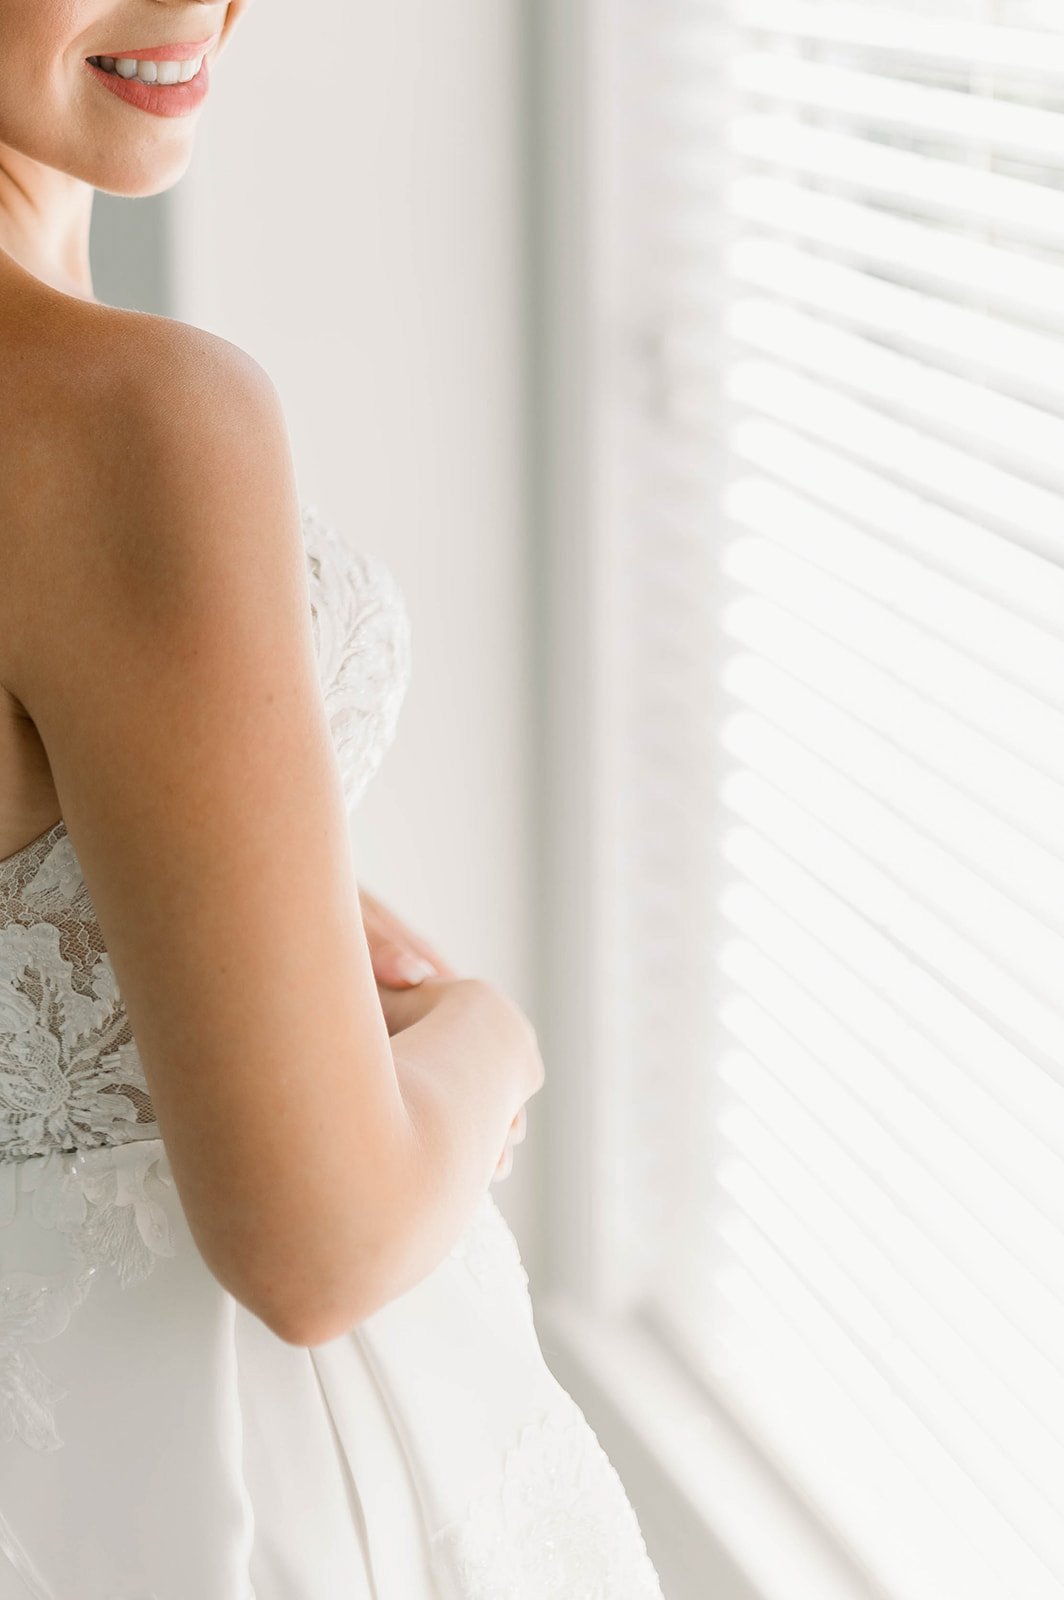 Bride shows off wedding dress and dental work before hart house wedding ceremony